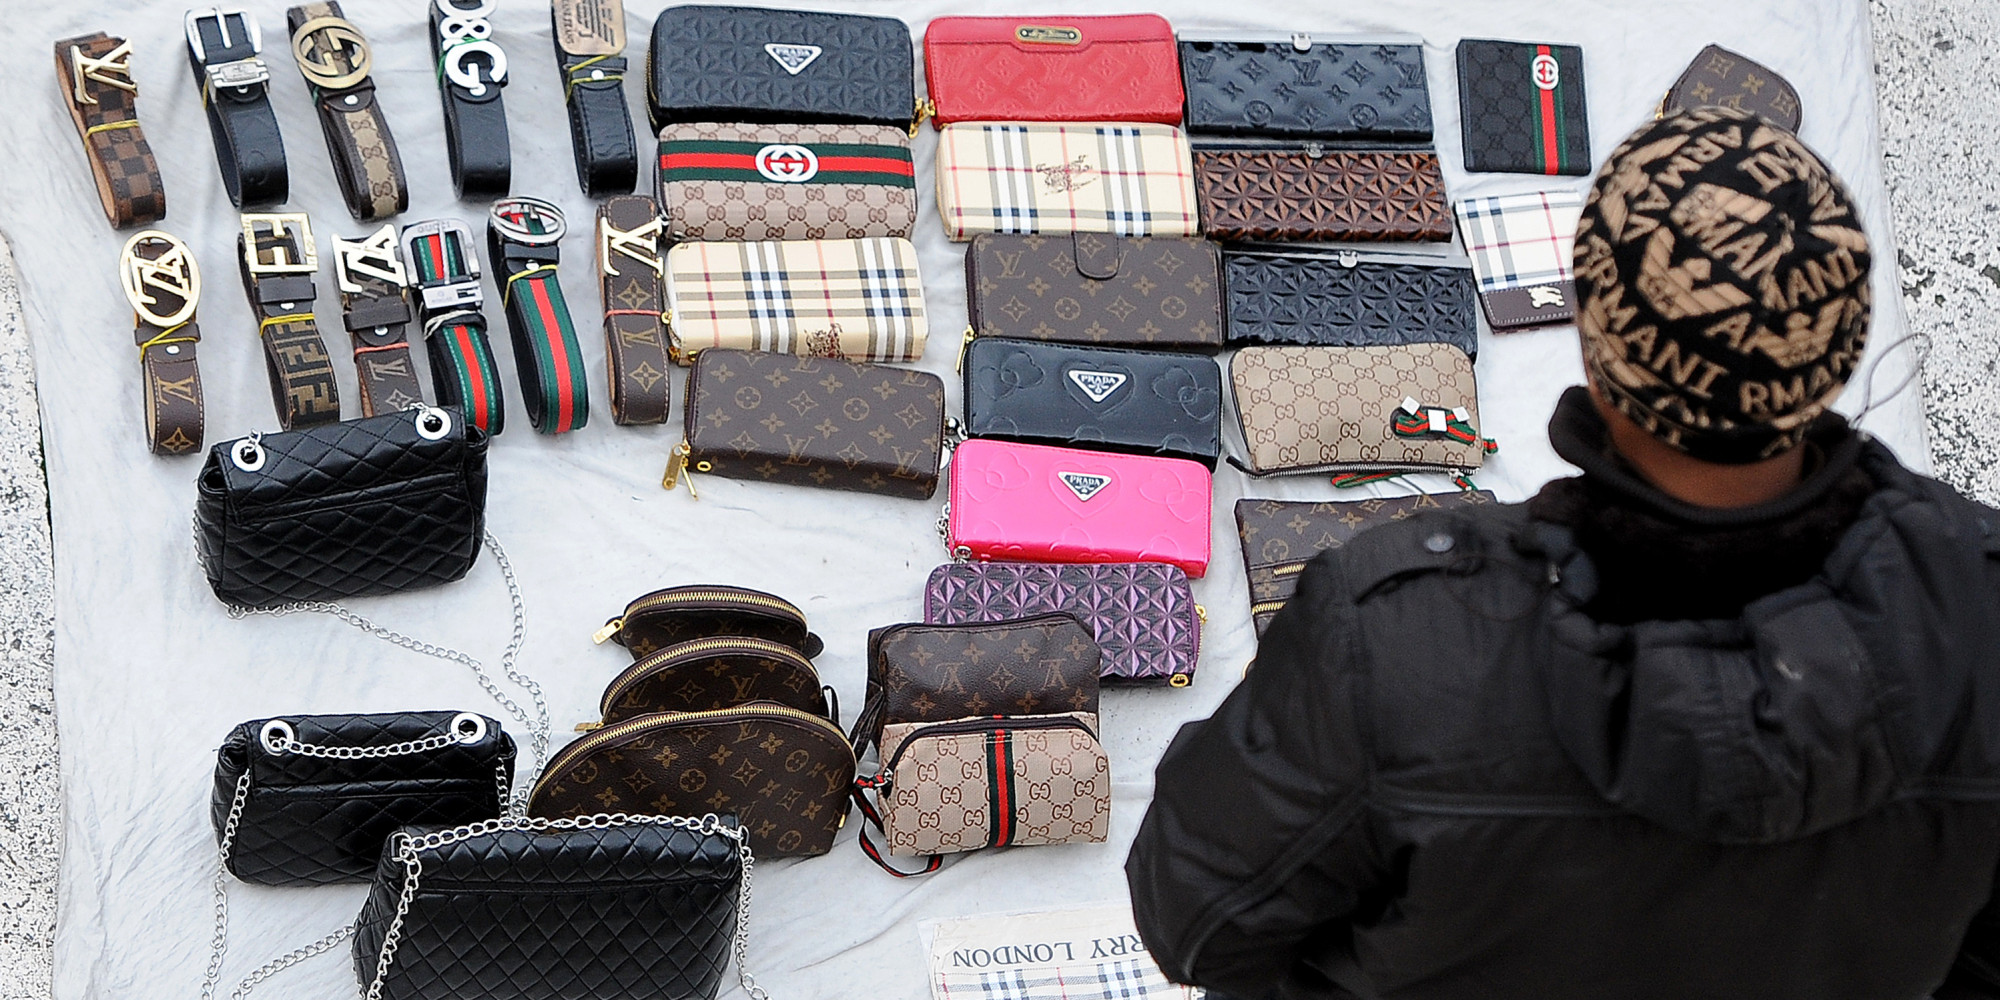 Fake Bags, Clothing Less Popular As Shoppers Find Better Deals On Designer Items: Survey | HuffPost